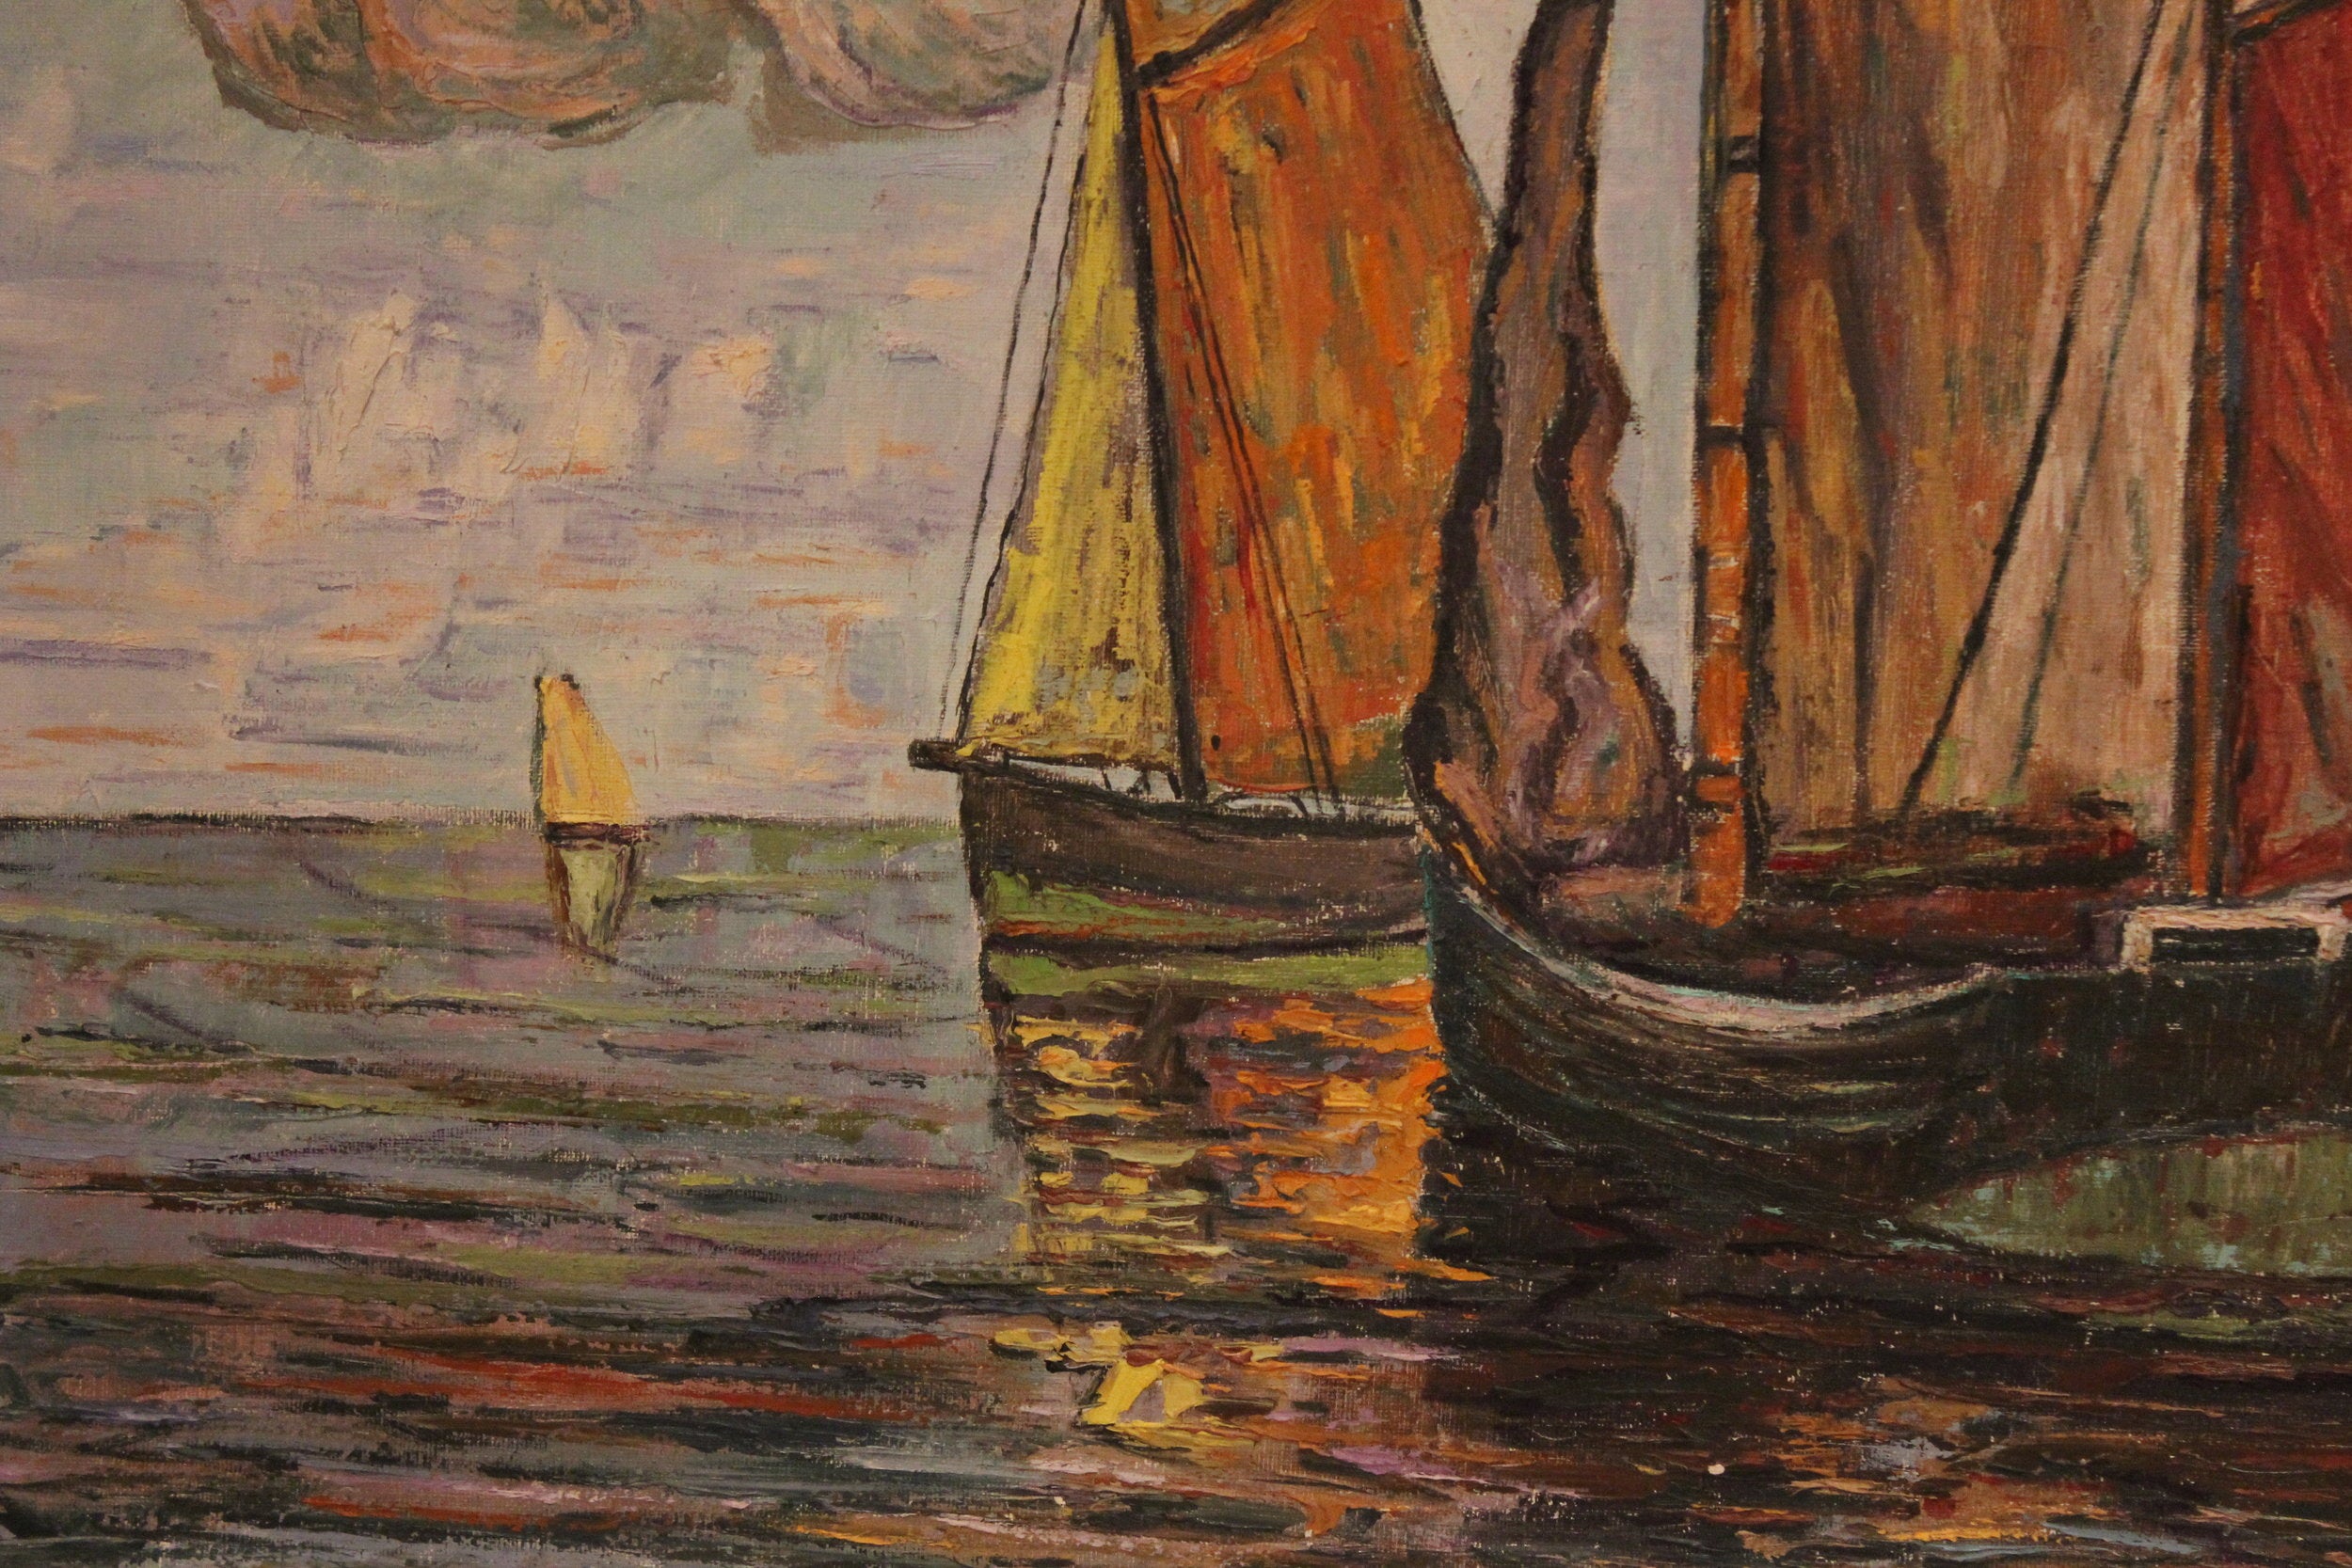 AW245 - Regah - Ships At Sea - Oil on Canvas